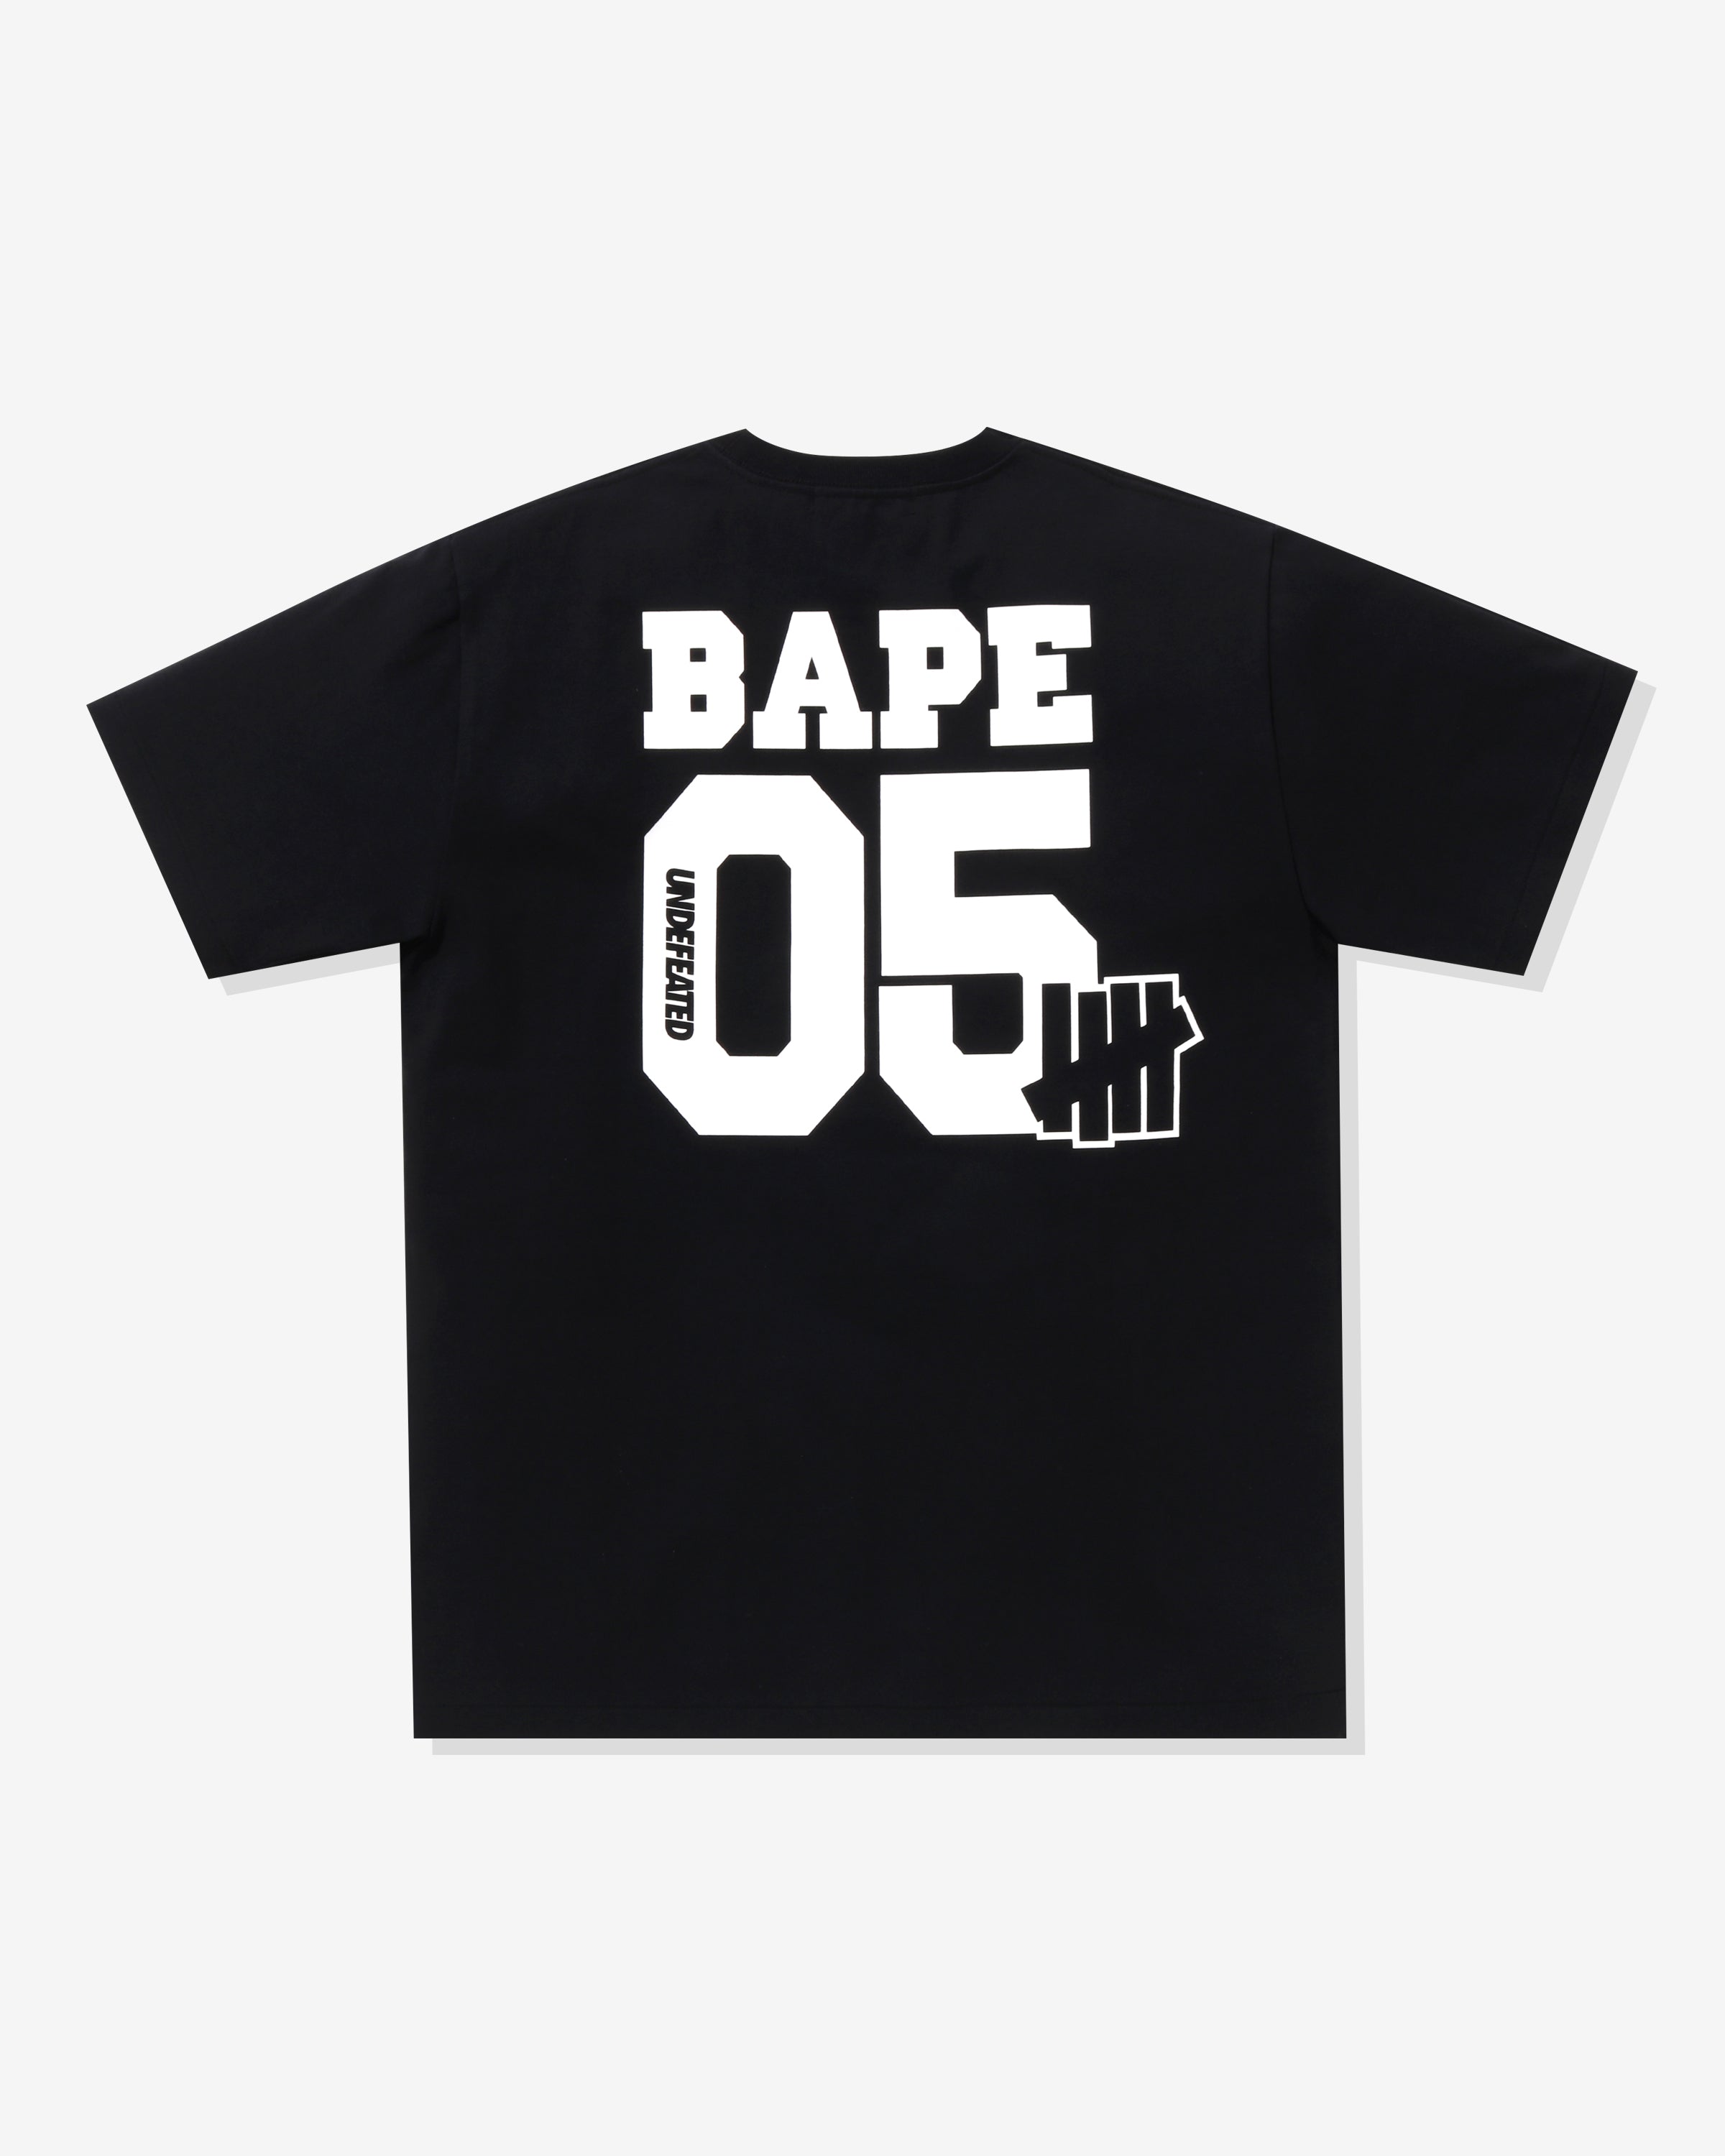 BAPE X UNDEFEATED COLLEGE TEE – Undefeated